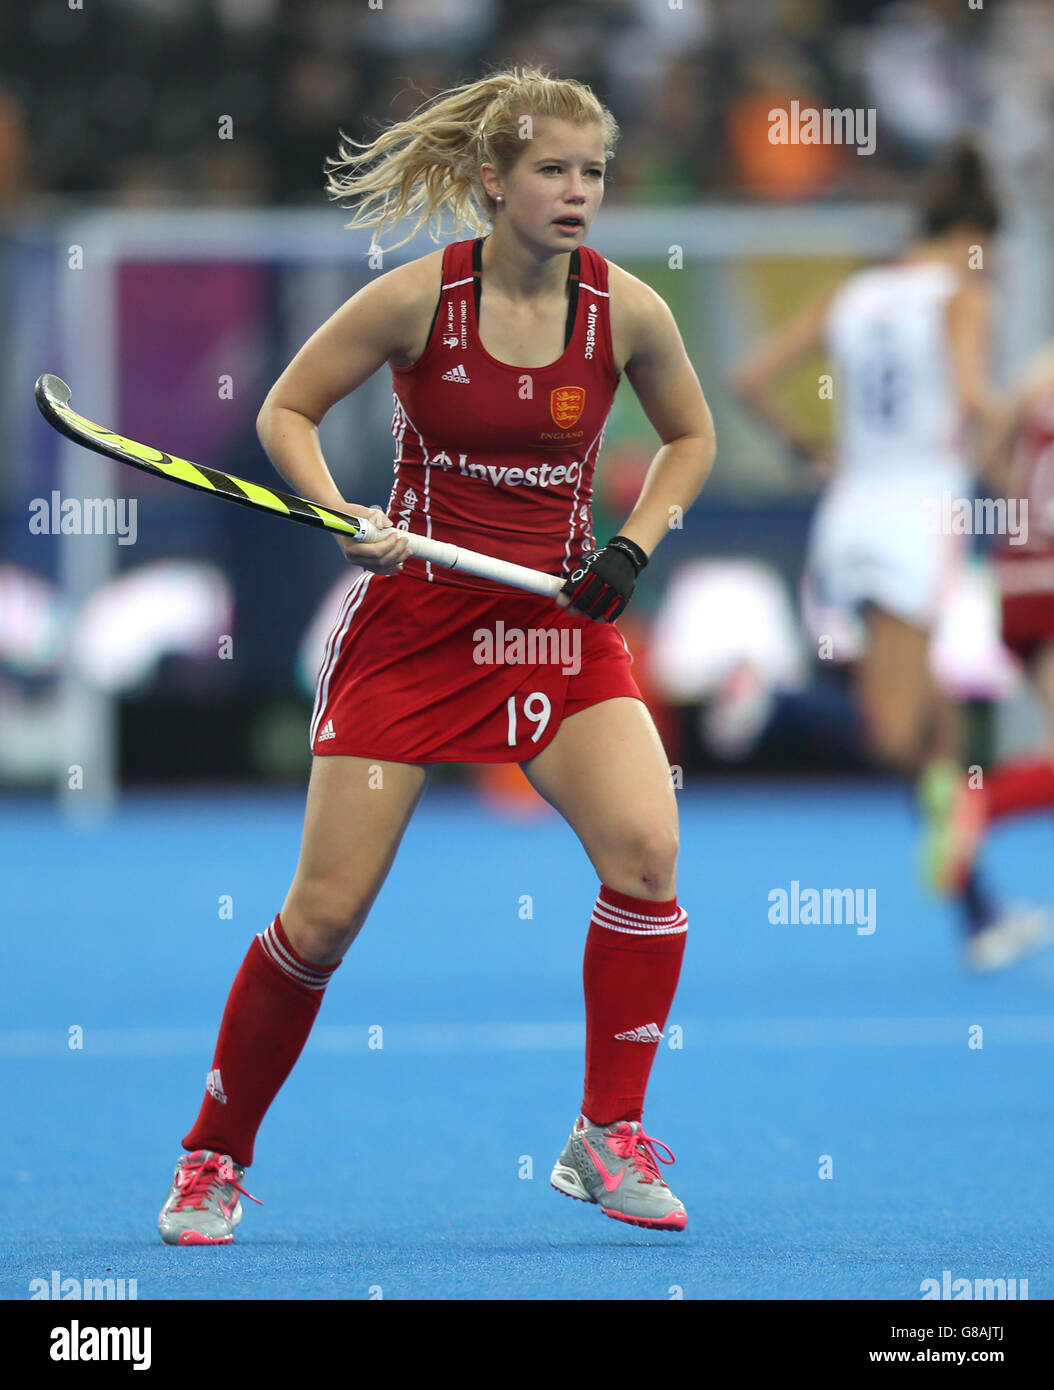 England's Sophie Bray during the Gold Medal match at the Lee Valley Hockey and Tennis Centre, London. PRESS ASSOCIATION Photo. Picture date: Sunday August 30, 2015. Photo credit should read: Simon Cooper/PA Wire Stock Photo